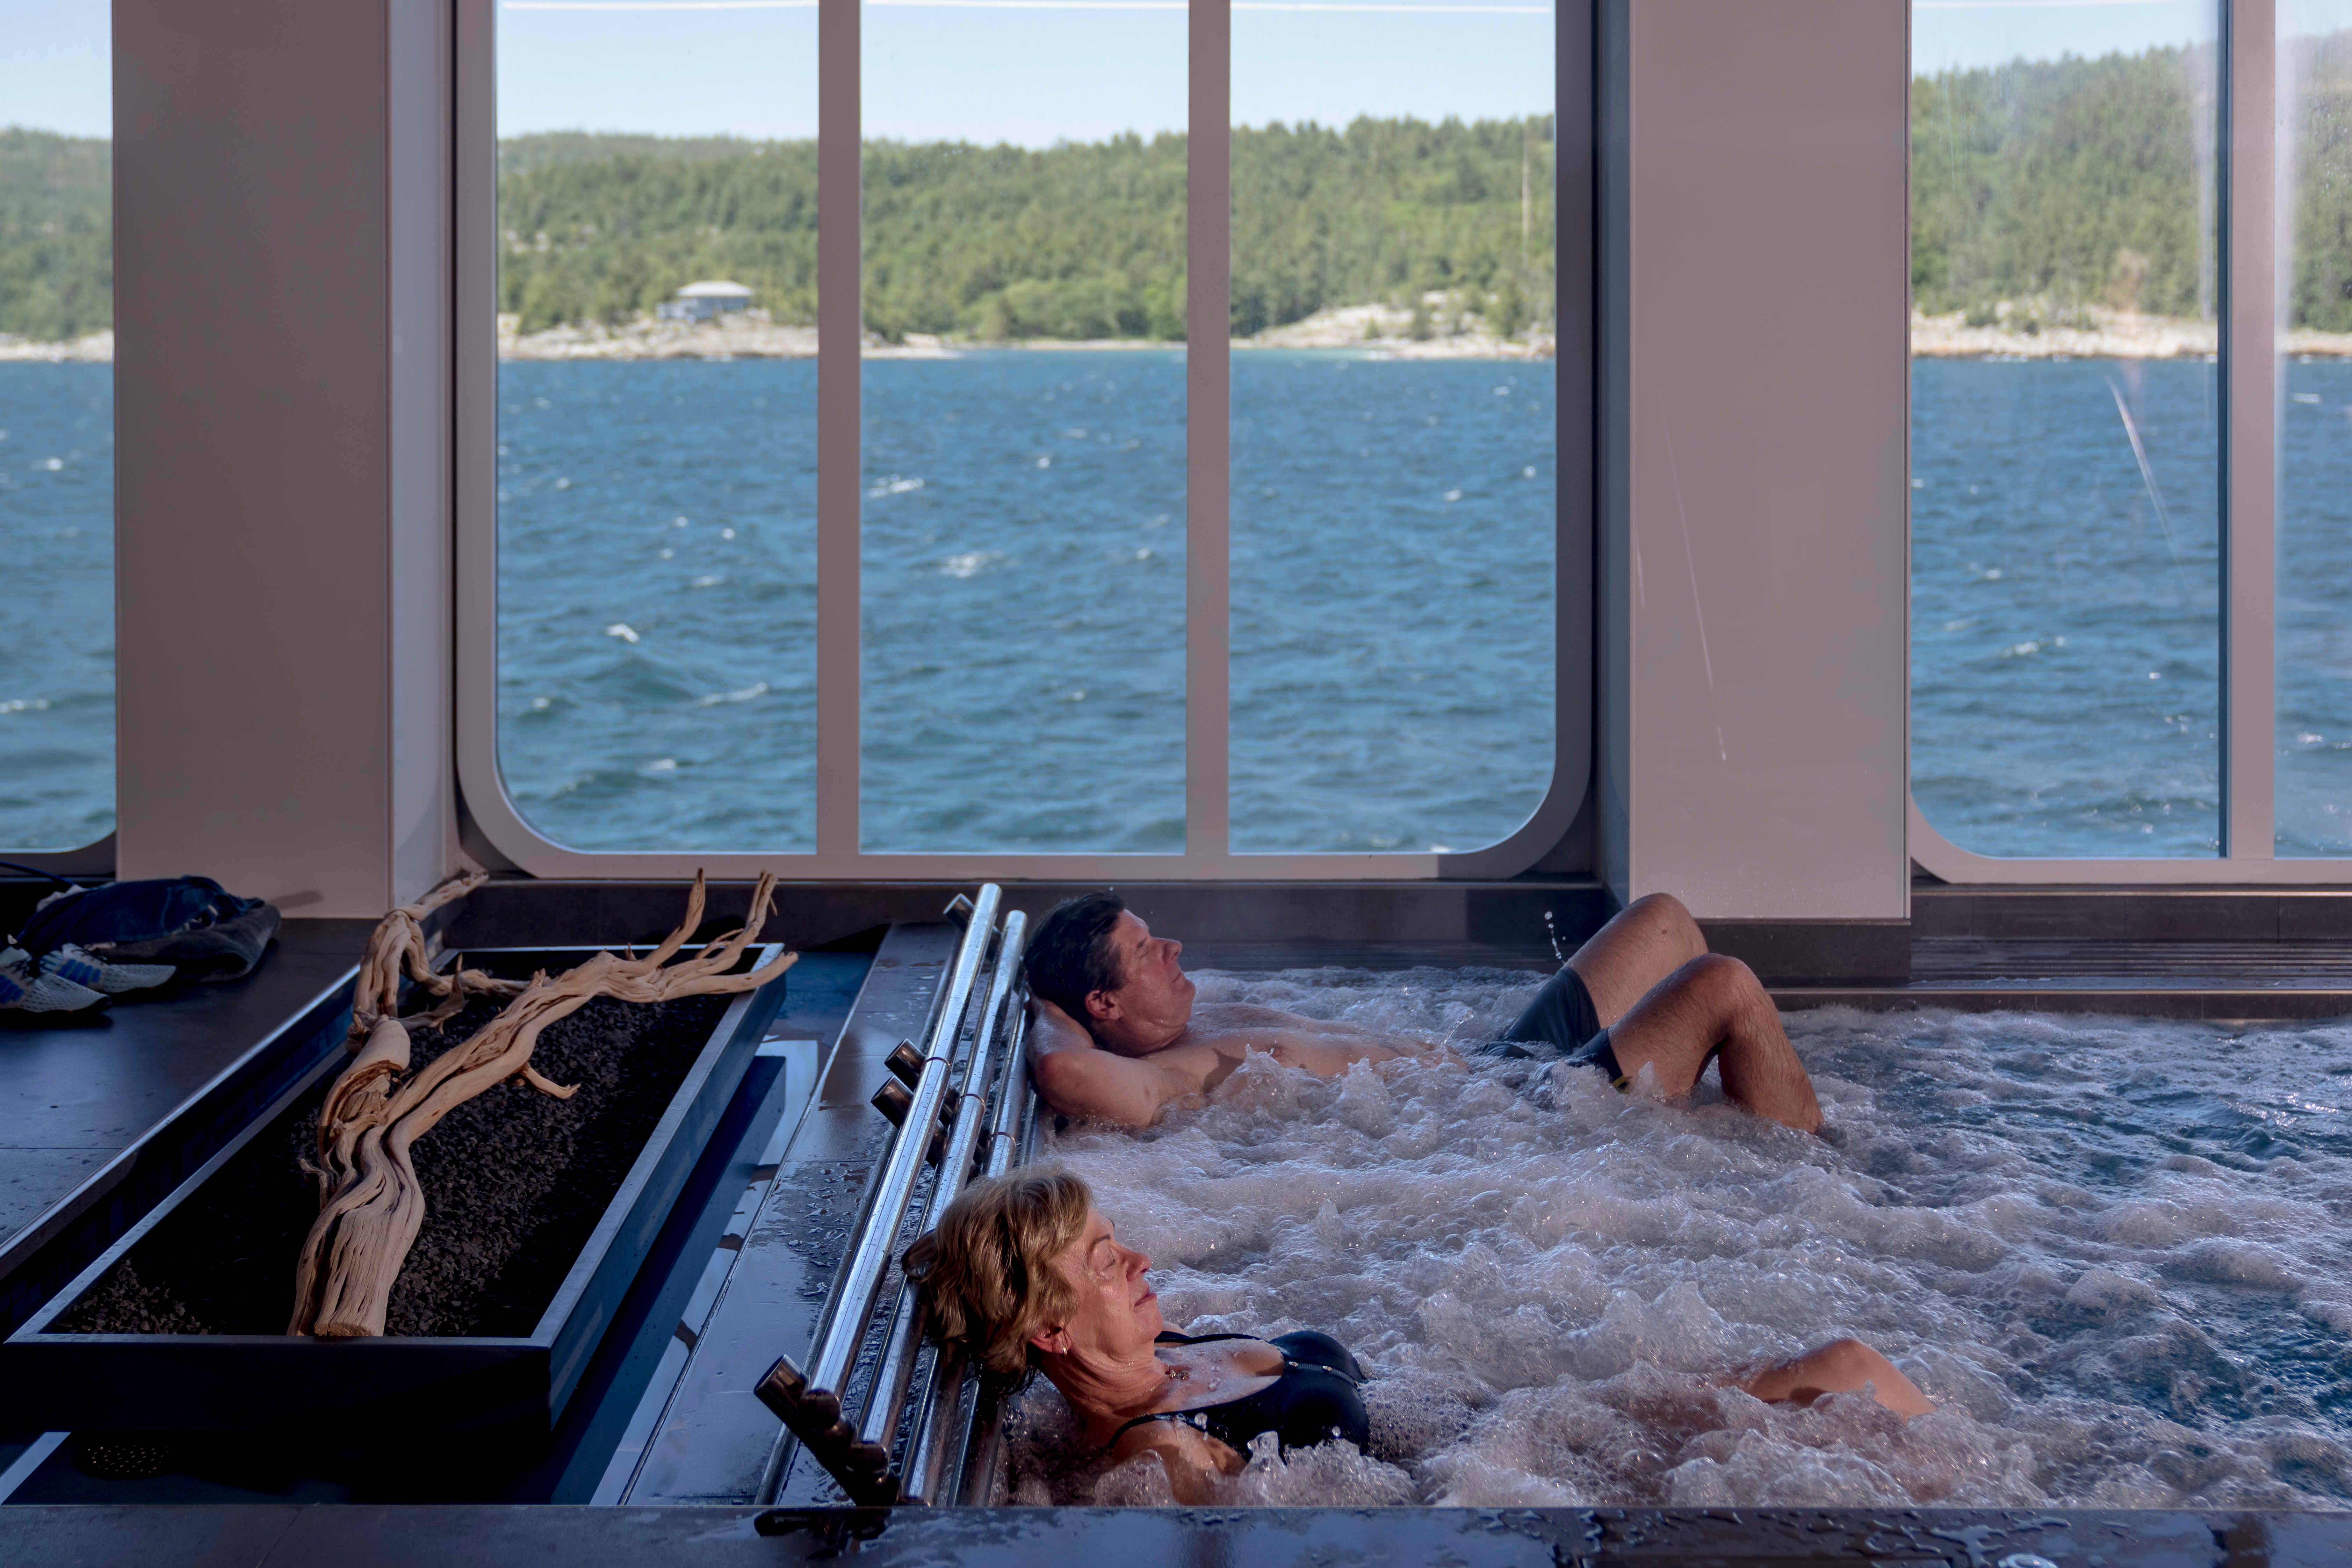 Pat Jones of Johnson City, Tennessee, front, and Robin Daniel of DeQueen, Arkansas, relax in the Nordic Spa Pool on Viking Octantis in Frazer Bay in Ontario, Canada, on June 22.